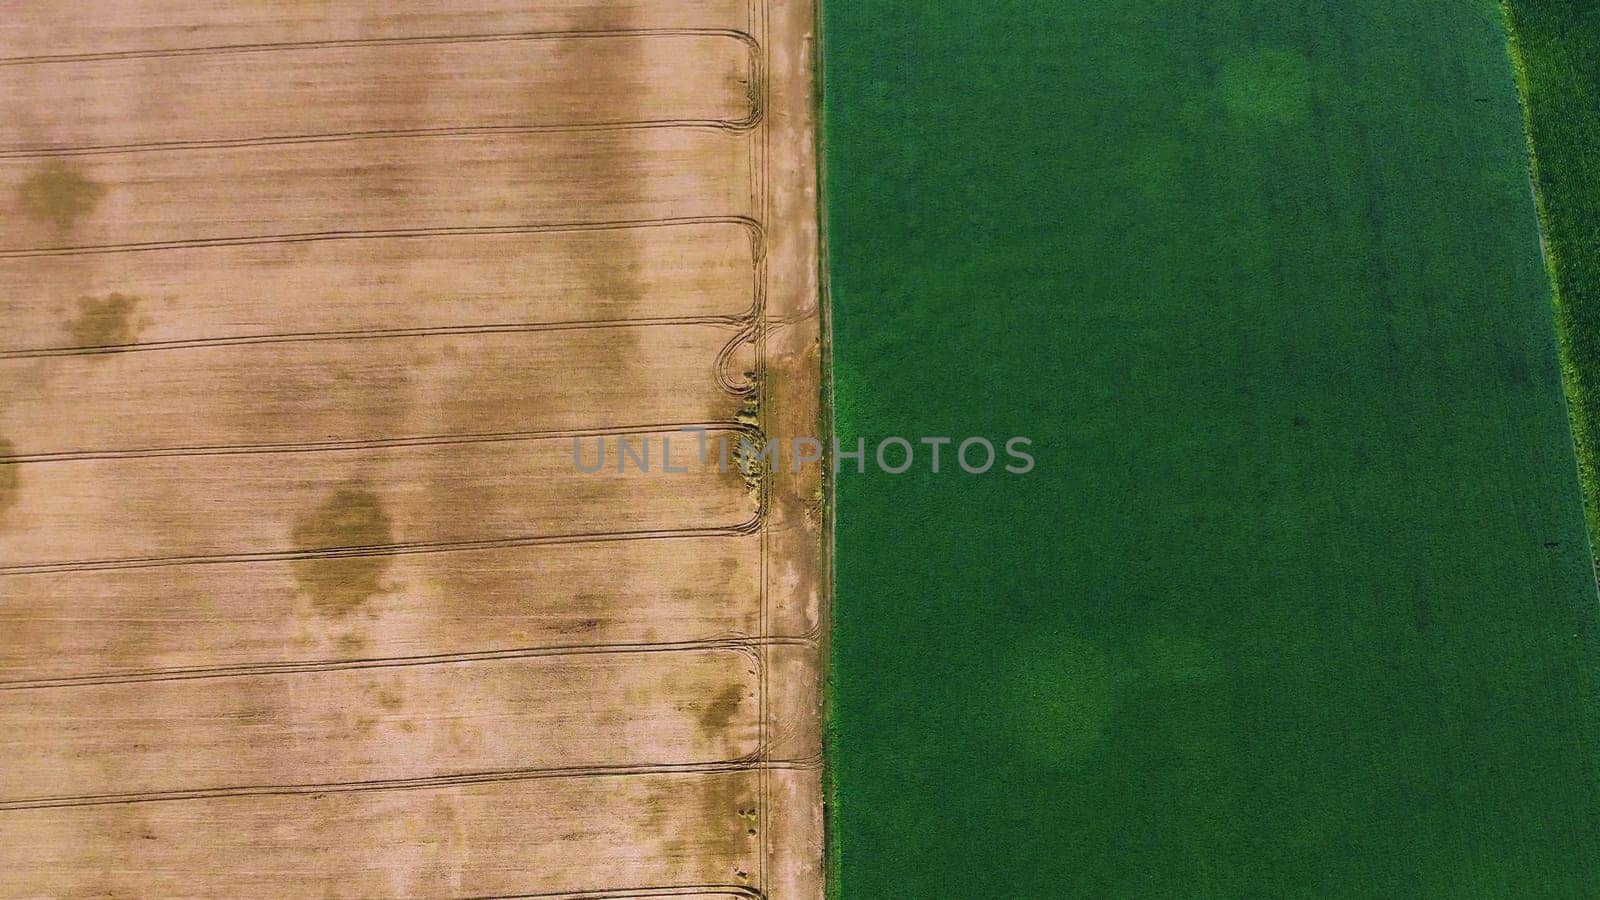 Aerial drone view over border between yellow wheat field and green agricultural field. Top view two halves of field. Landscape view other different agricultural fields. Agricultural natural background